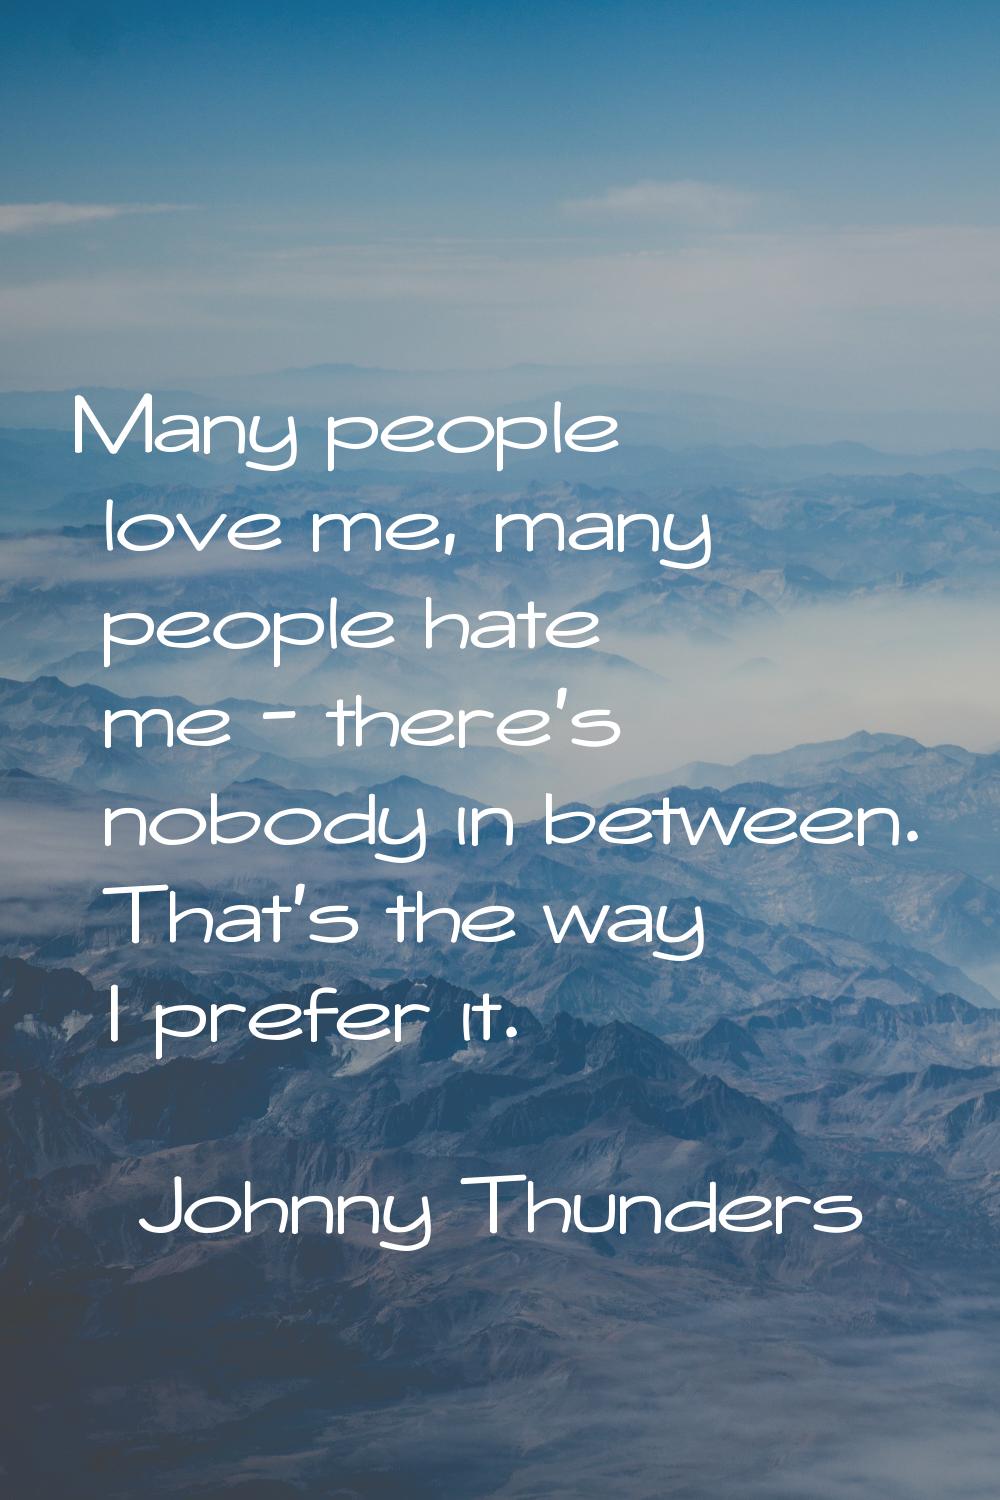 Many people love me, many people hate me - there's nobody in between. That's the way I prefer it.